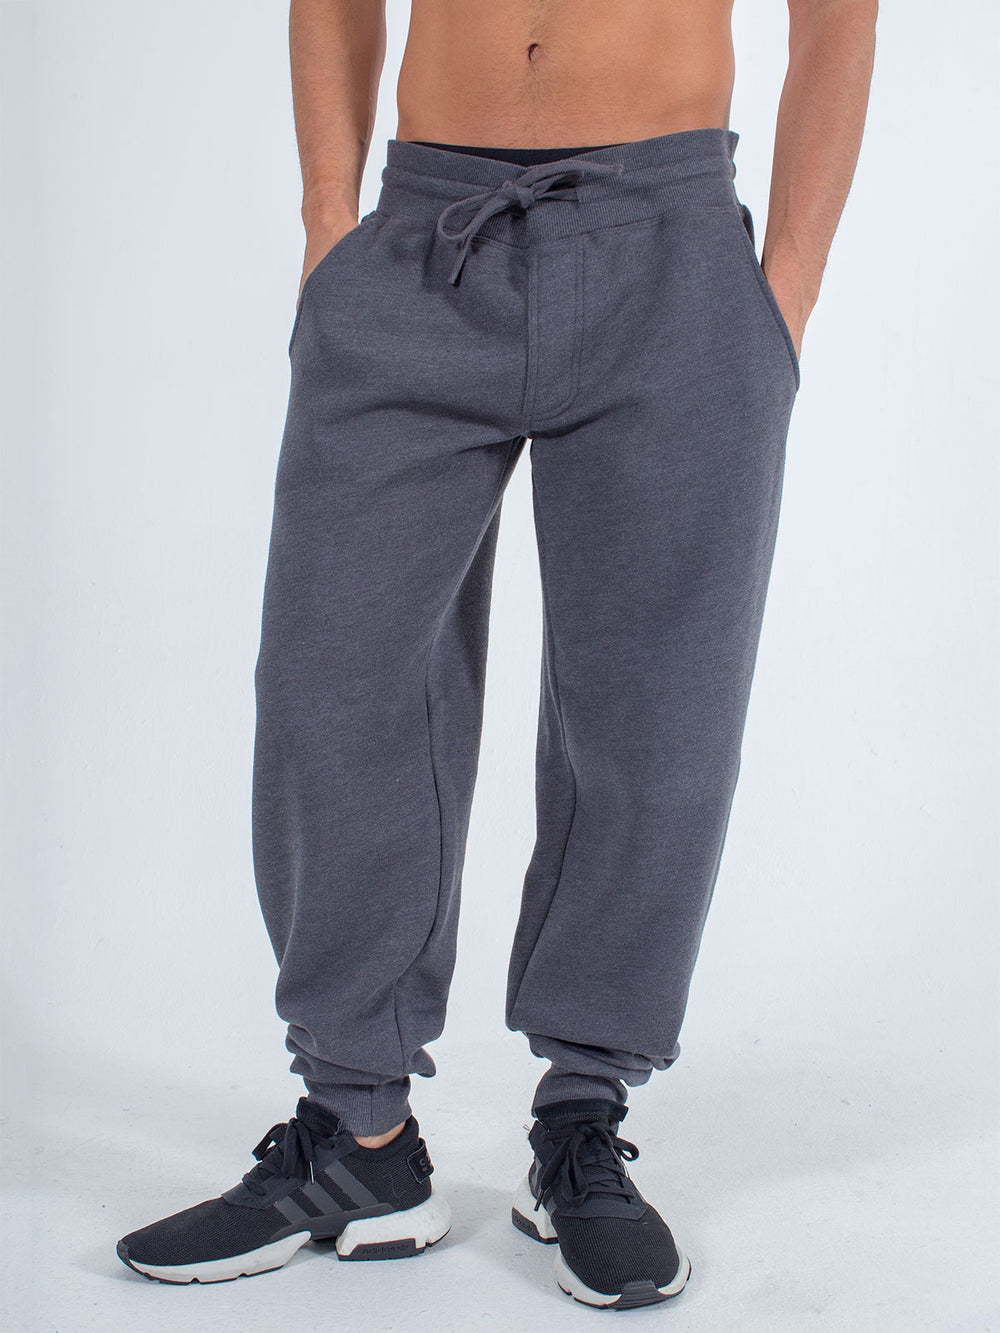 Softie Joggers in Heather Gray